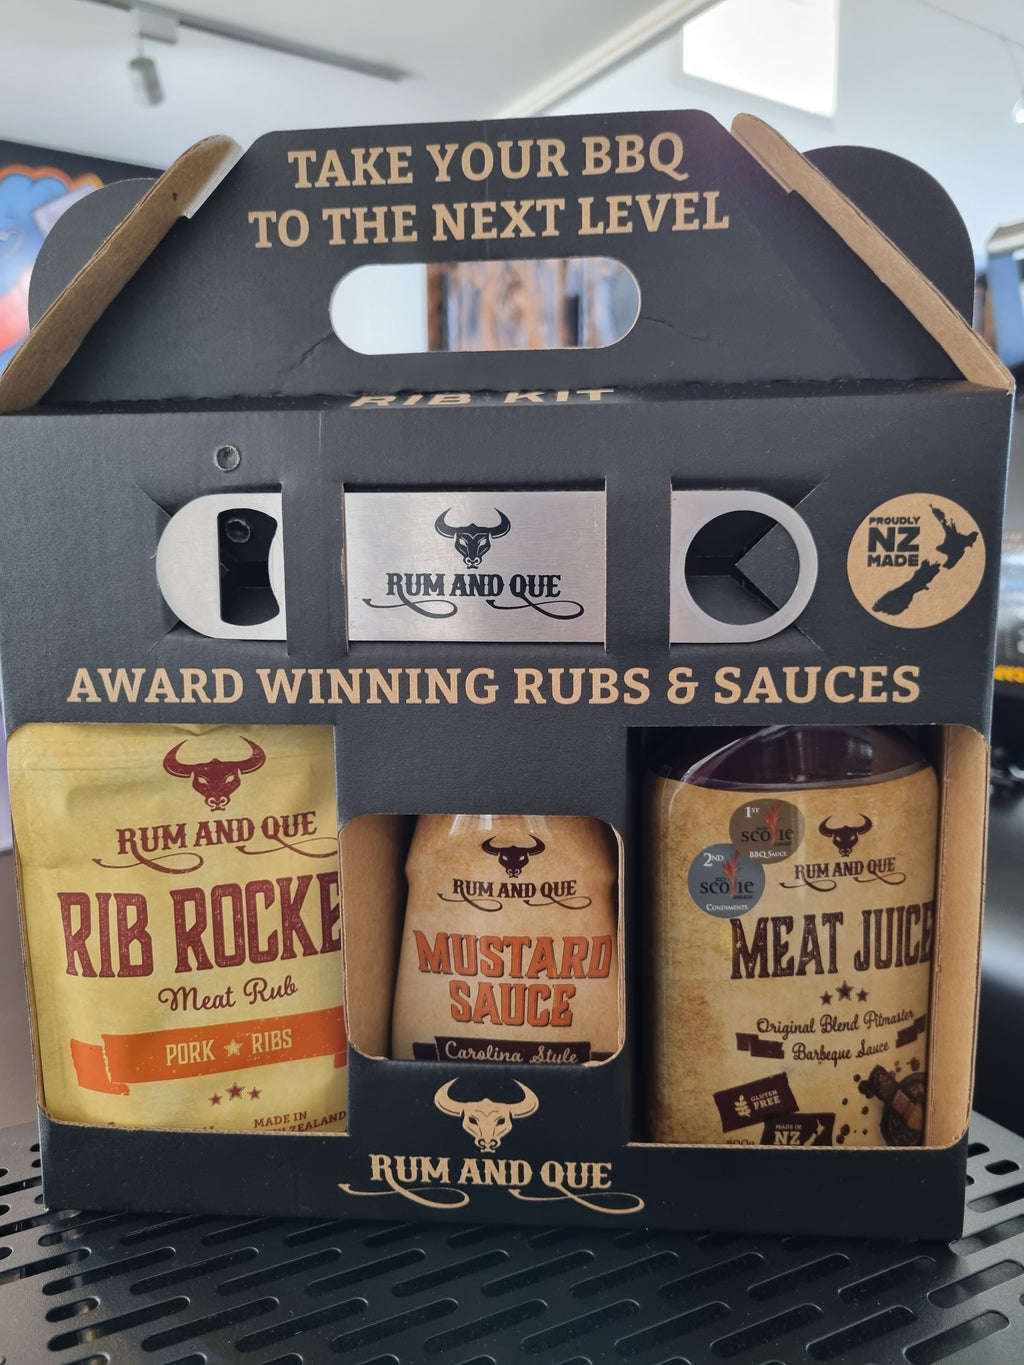 Wing Kits and Rib Kits by Rum & Que